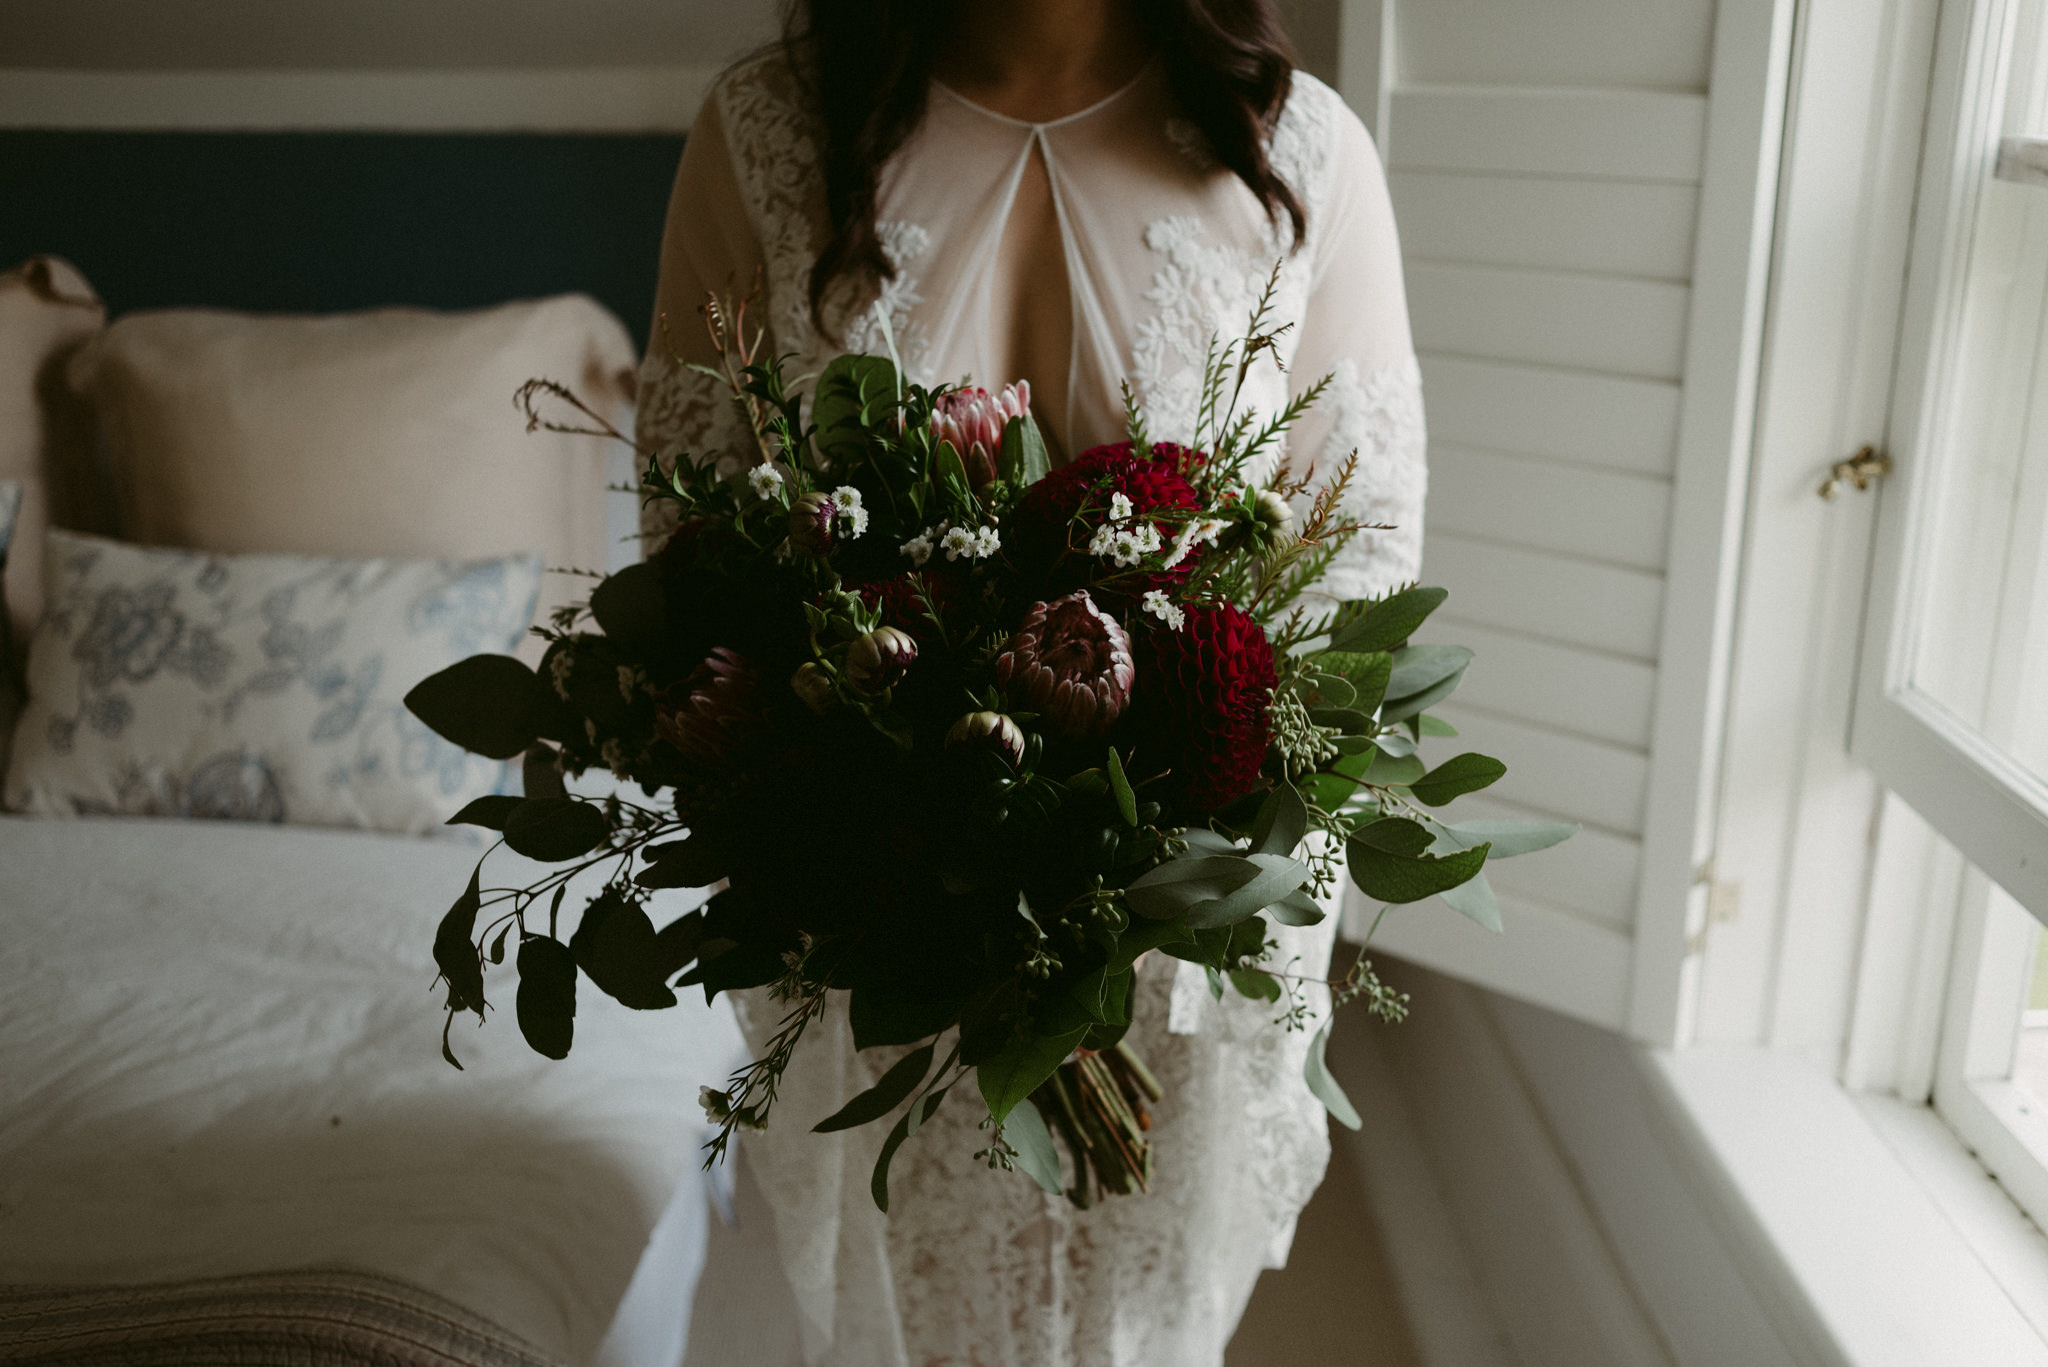 Bride in lace dress holding maroon and dark green bouquet